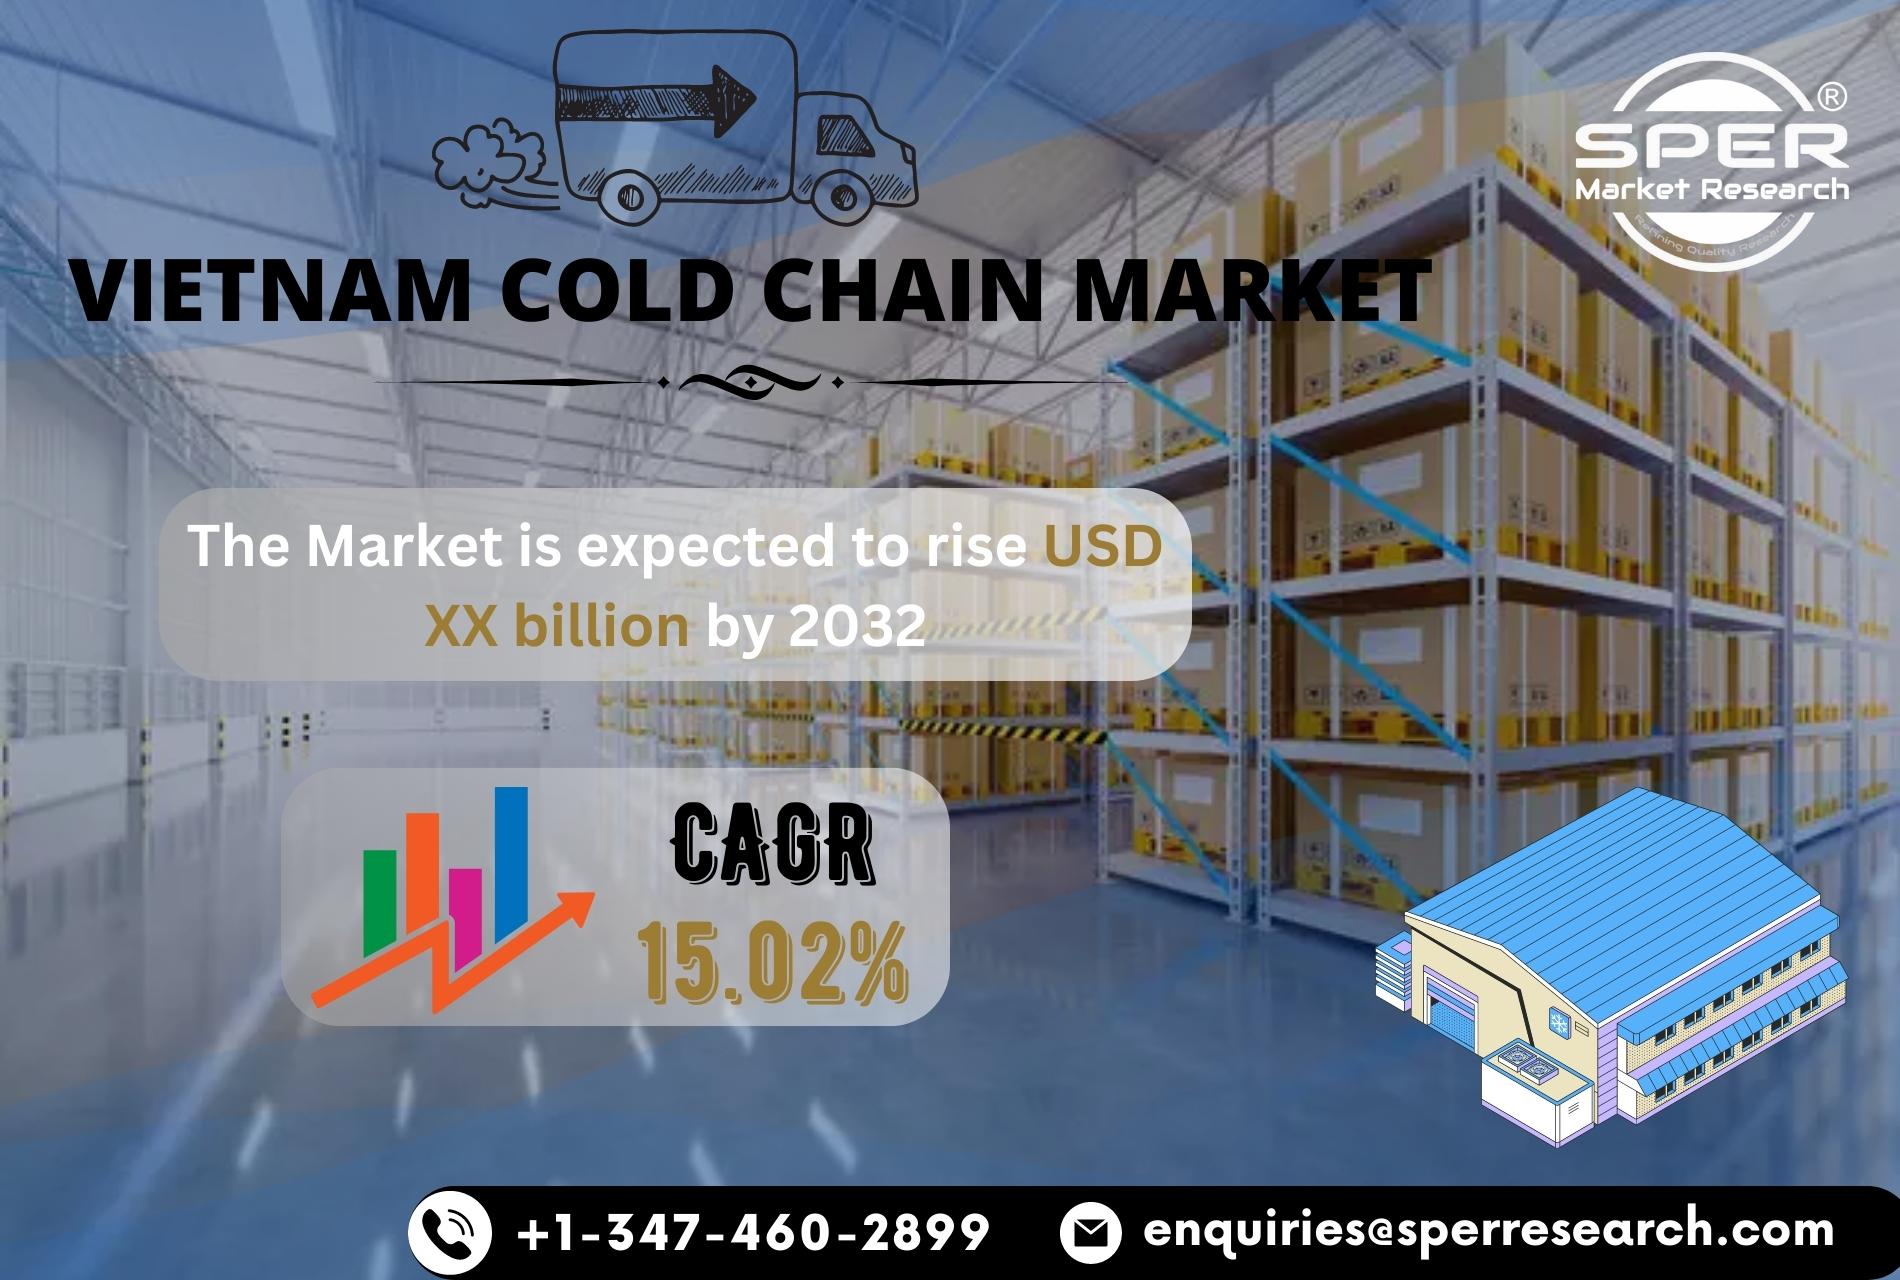 Vietnam Cold Chain Market Growth and Share, Trends Analysis, Revenue, Forecast